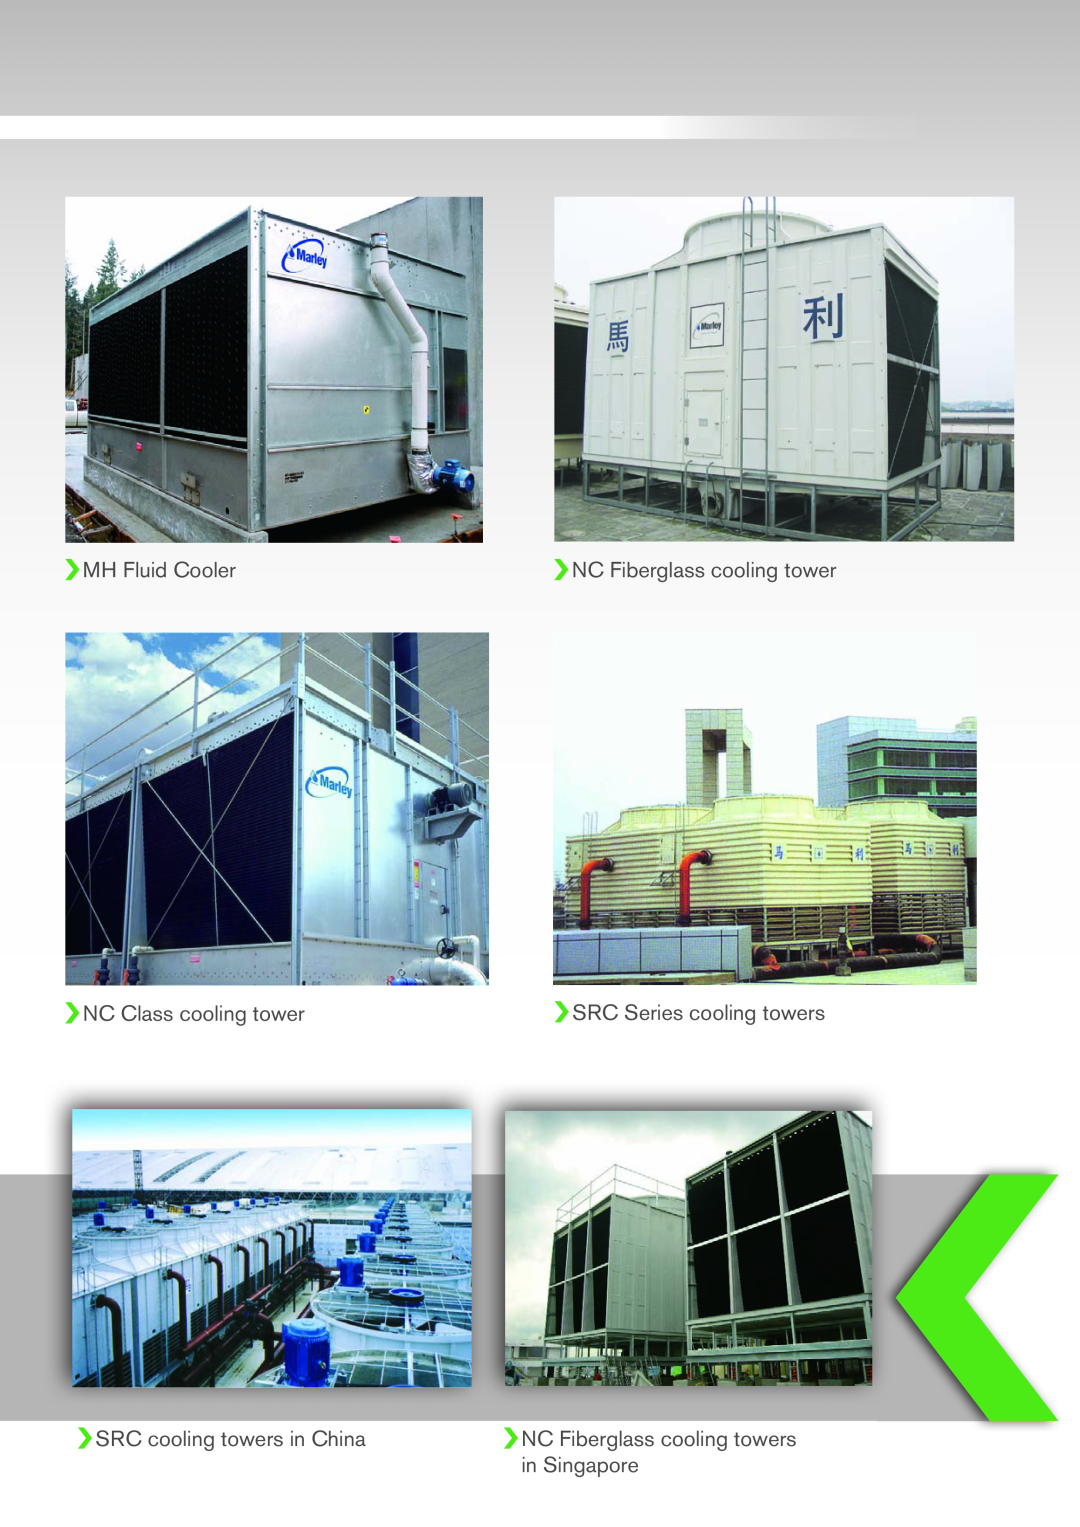 SPX Cooling Technologies SPXM-08 manual MH Fluid Cooler, NC Class cooling tower, SRC cooling towers in China, in Singapore 